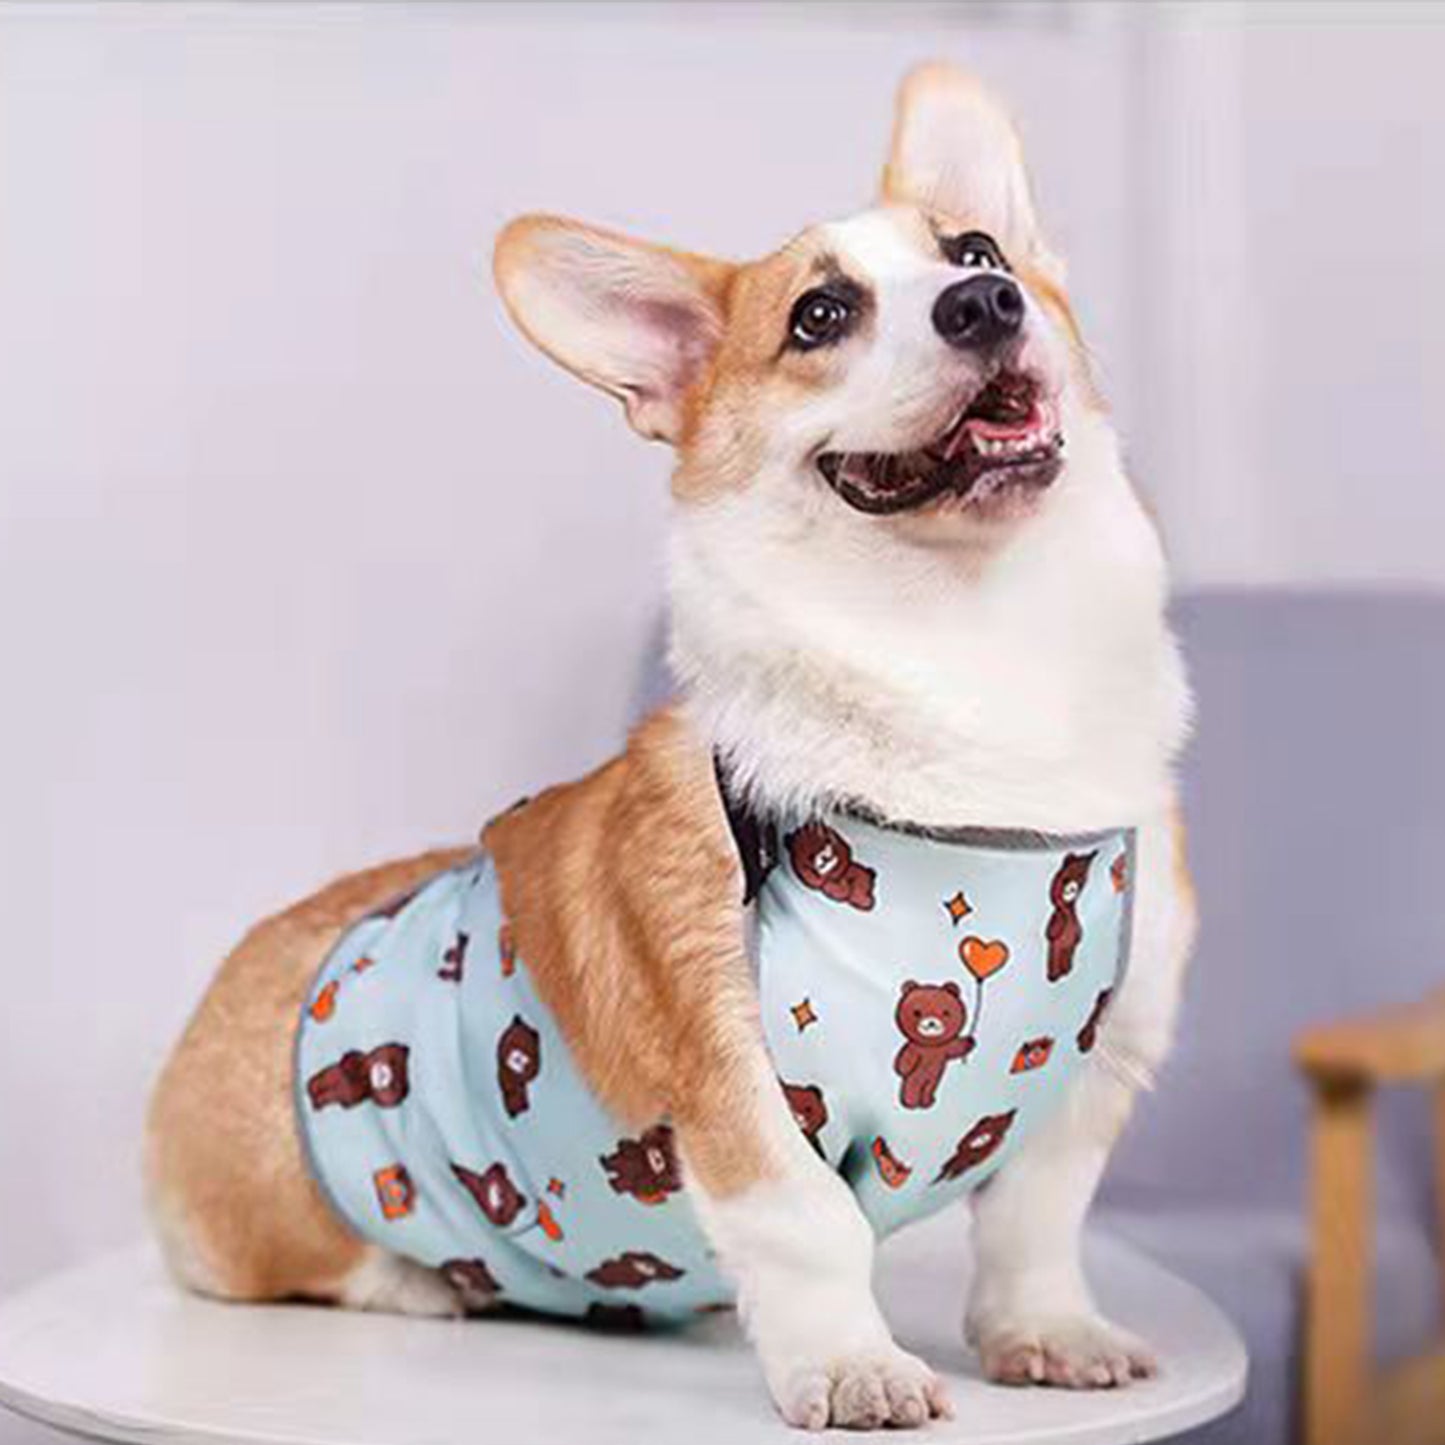 Waterproof Corgi Belly Protector for Short-Legged Dogs